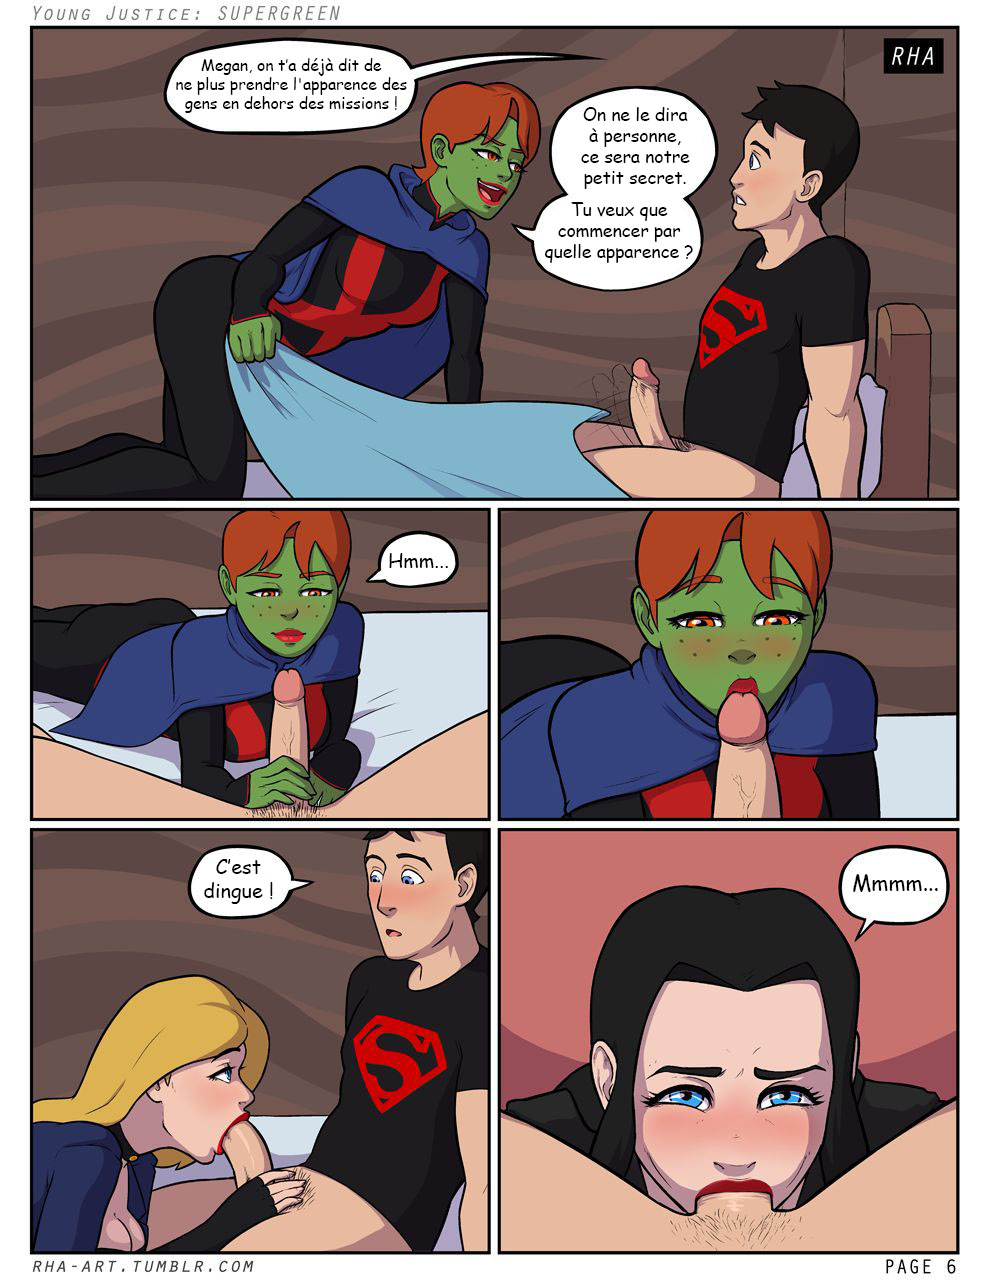 Young Justice: Supergreen numero d'image 5